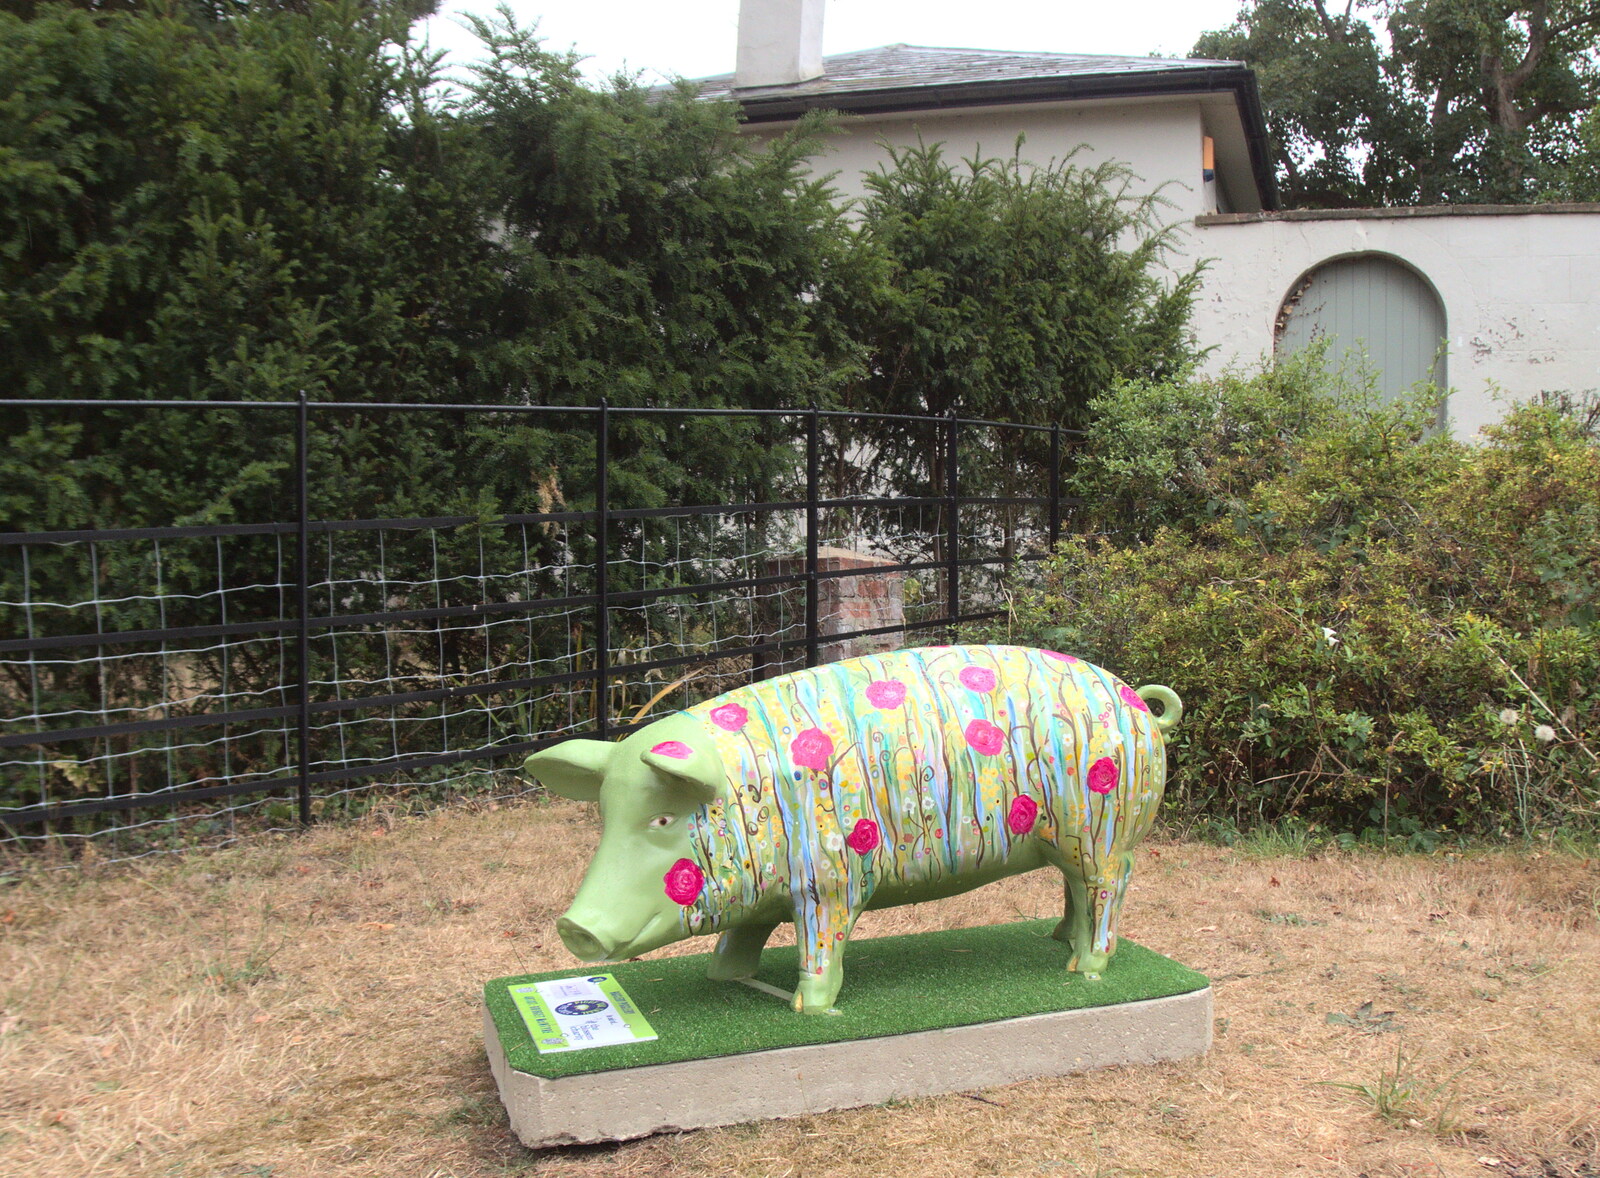 The Eye Piggy Tail Trail and Ipswich Dereliction, Suffolk - 29th July 2022: A flowery pig